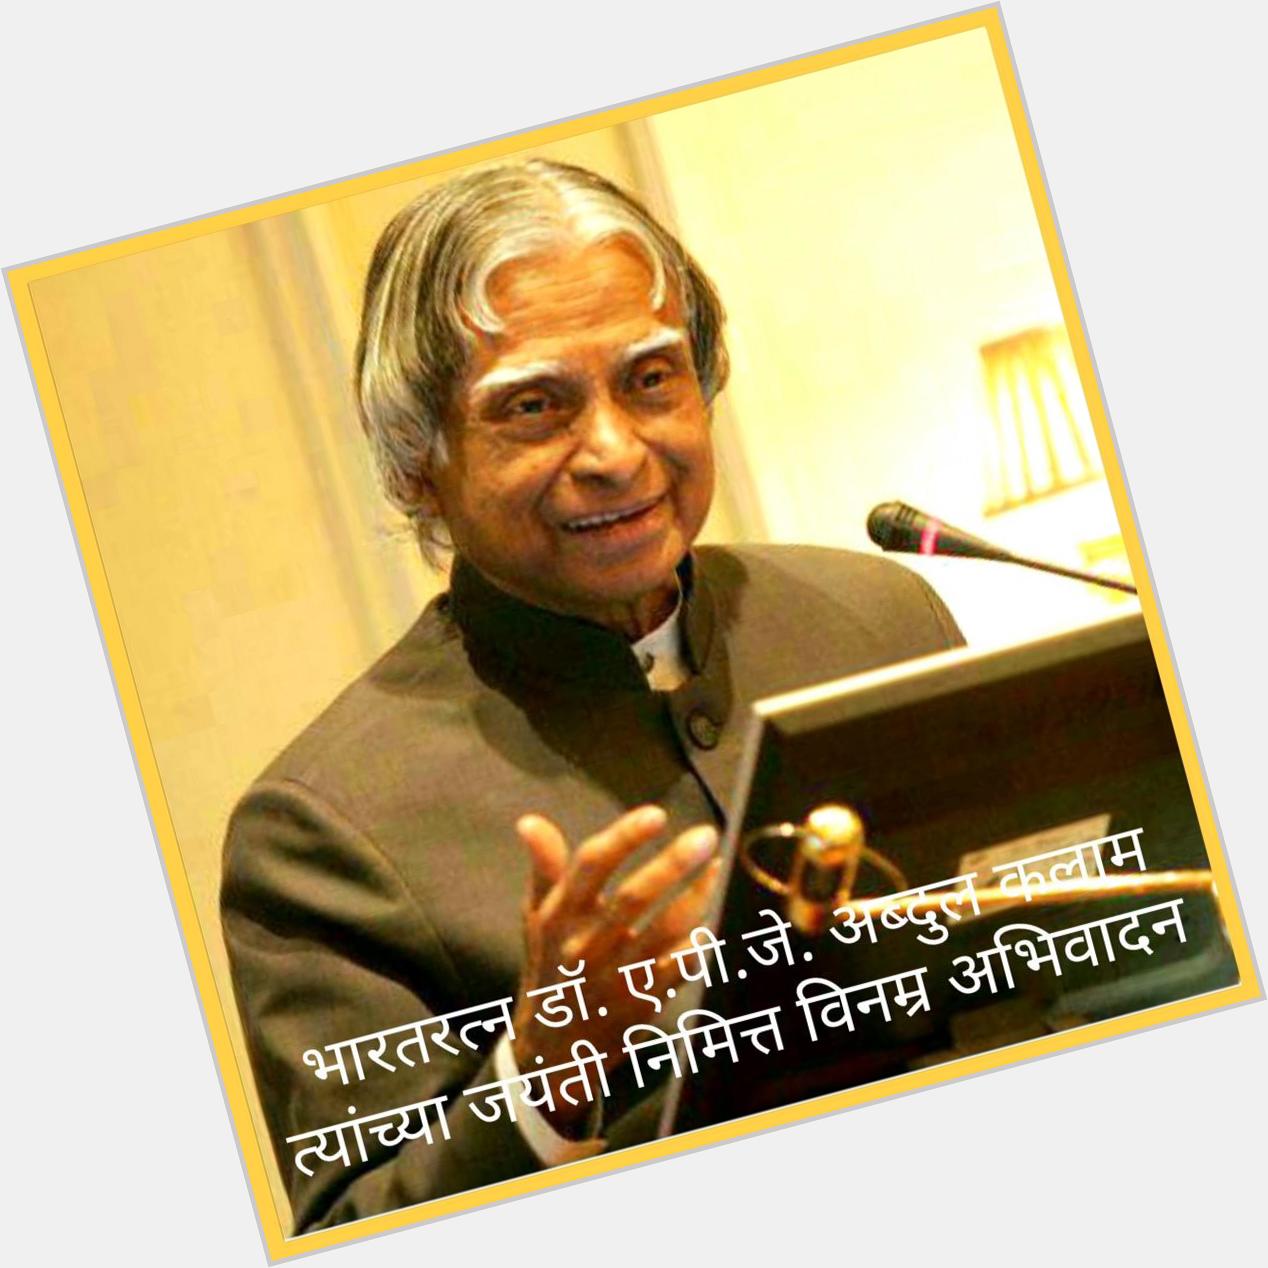 Happy Birthday Abdul Kalam Sir, Your birthday is being celebrated everywhere but my birthday remembered 27th July. 